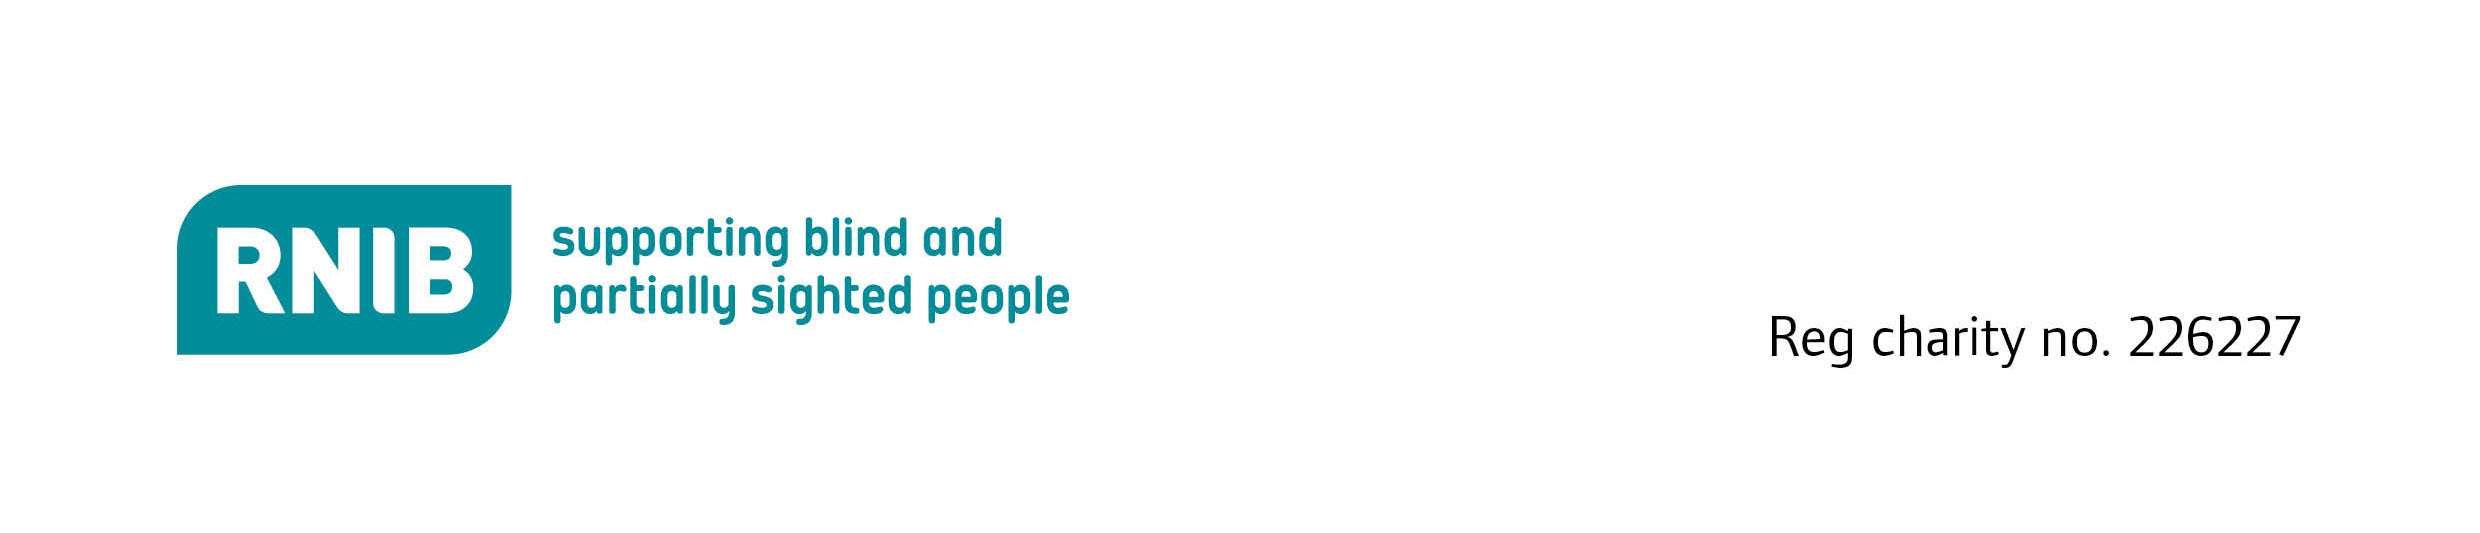 rnib – supporting blind and partially sighted people registered charity number 226227 